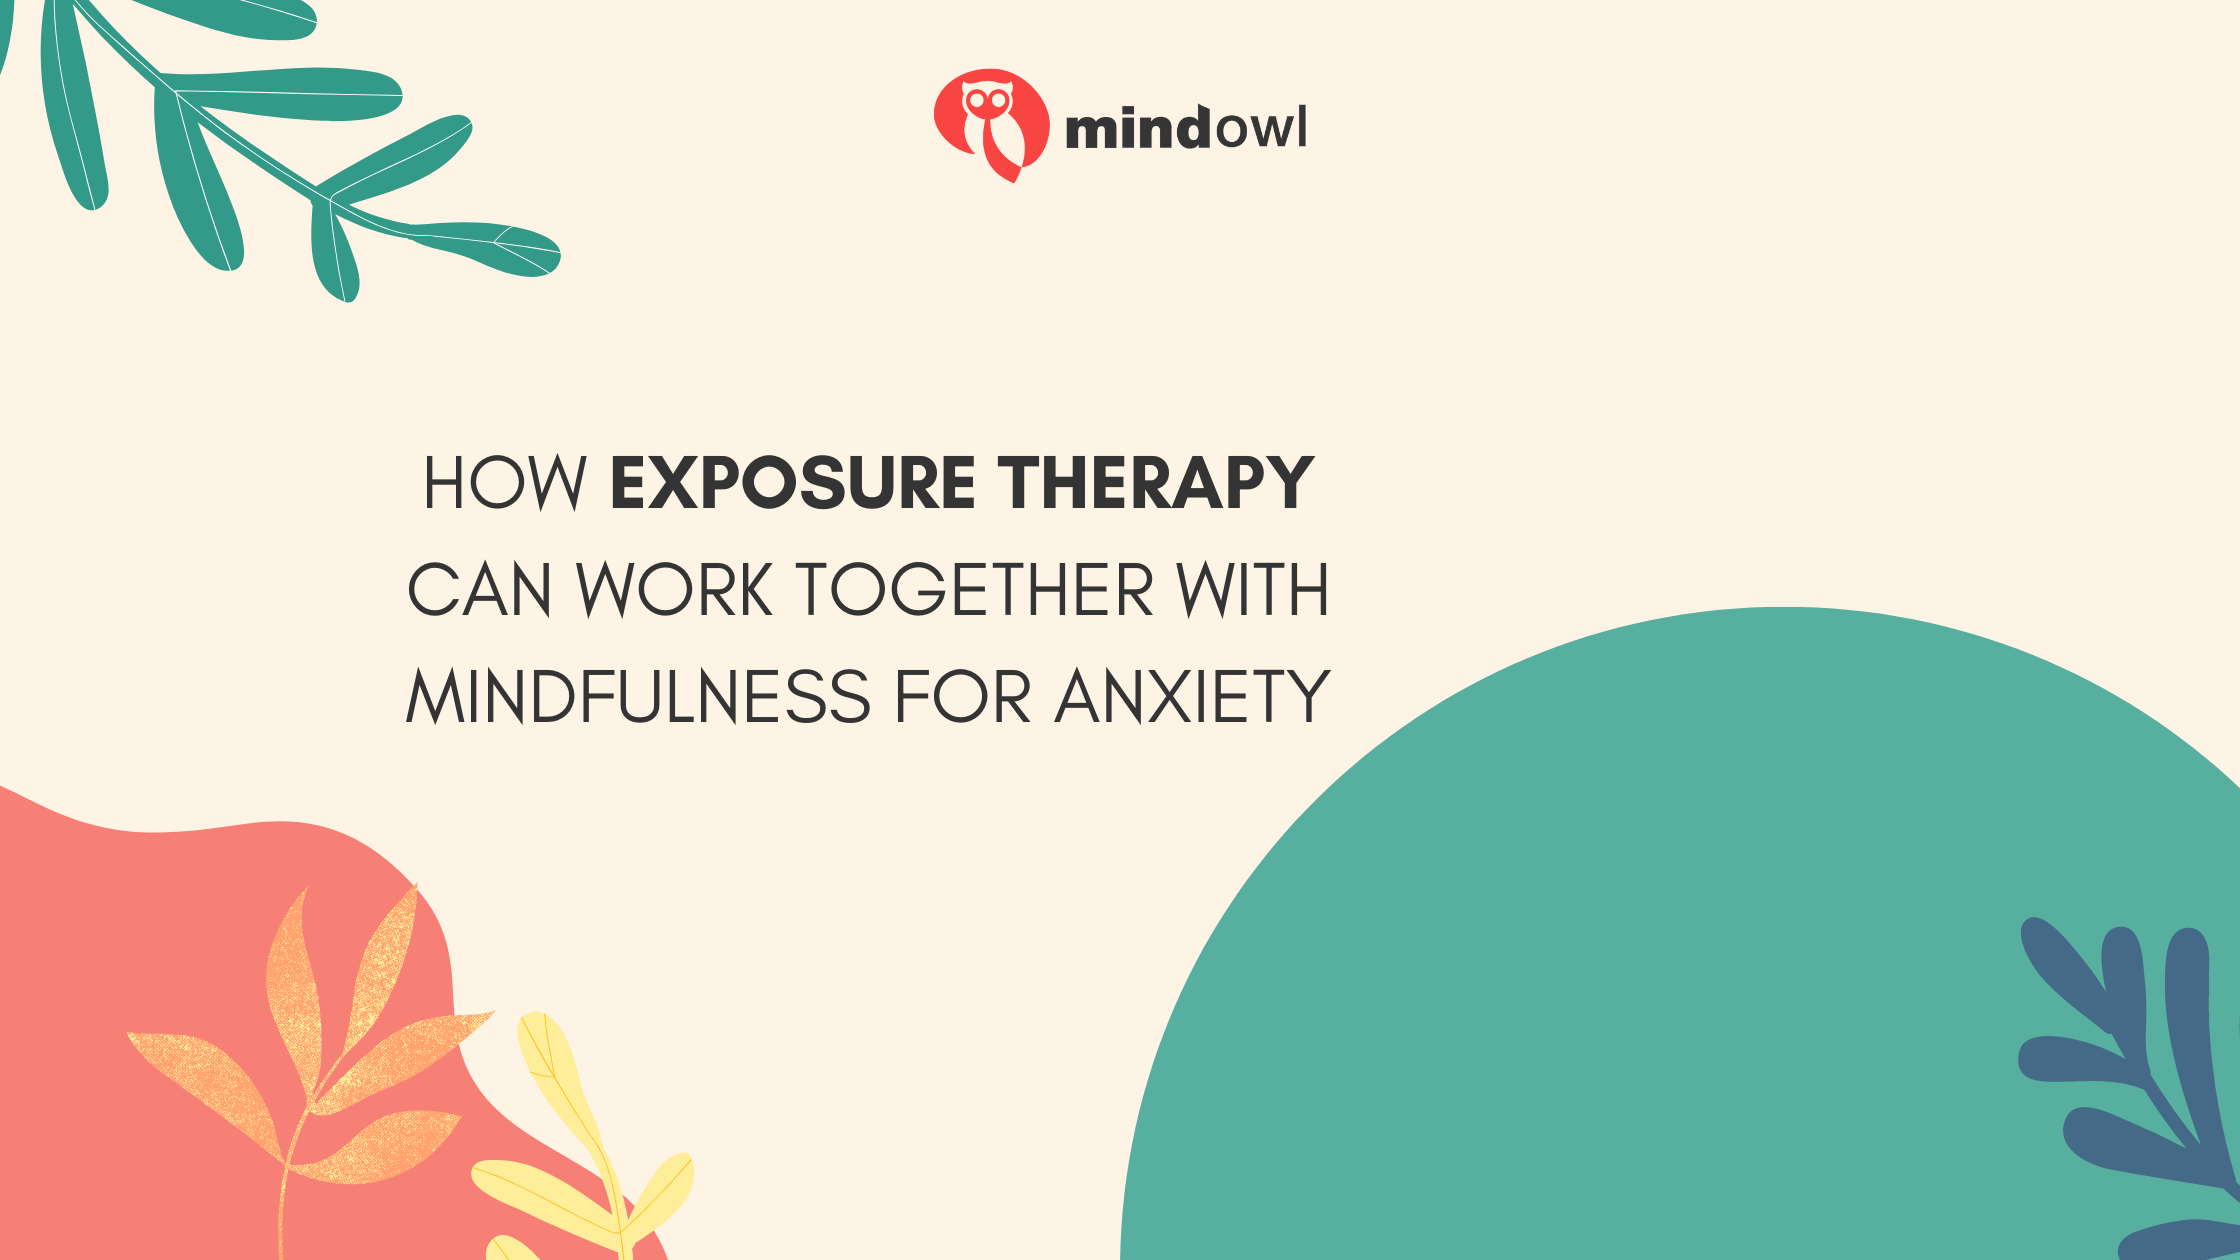 How Exposure Therapy Can Work Together With Mindfulness For Anxiety